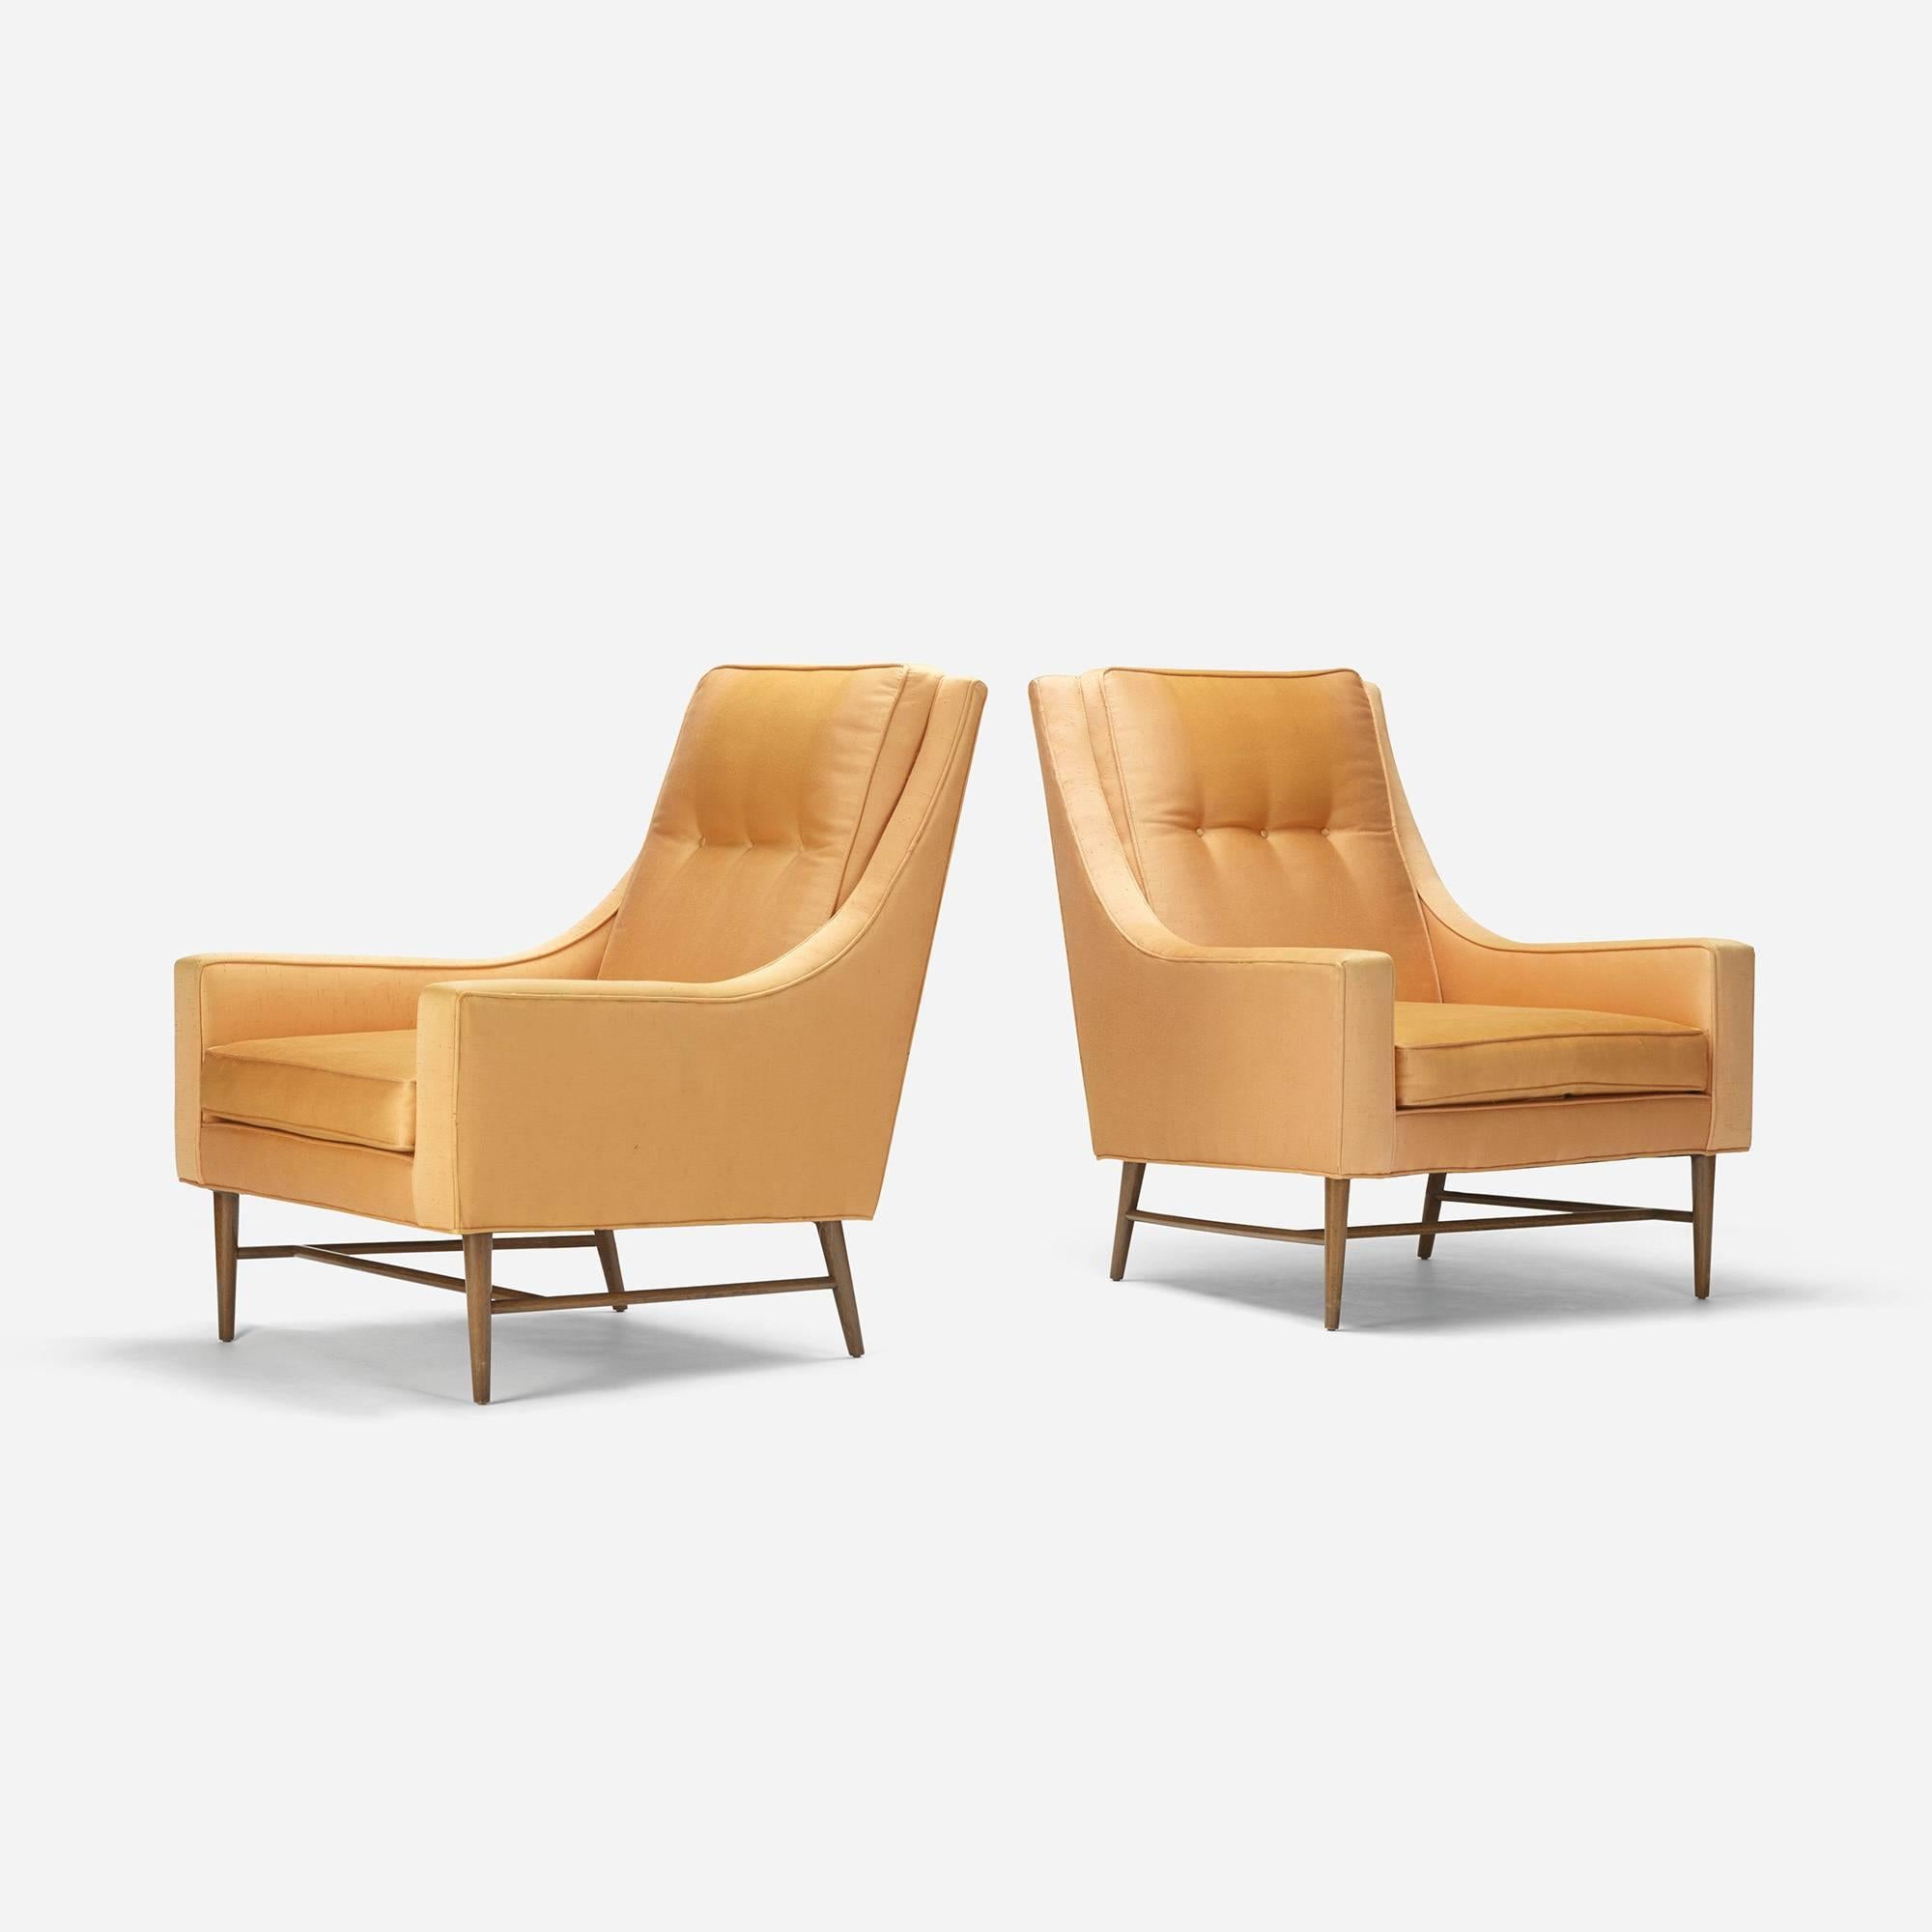 Lounge chairs, pair by Paul McCobb for Custom Craft, Inc.